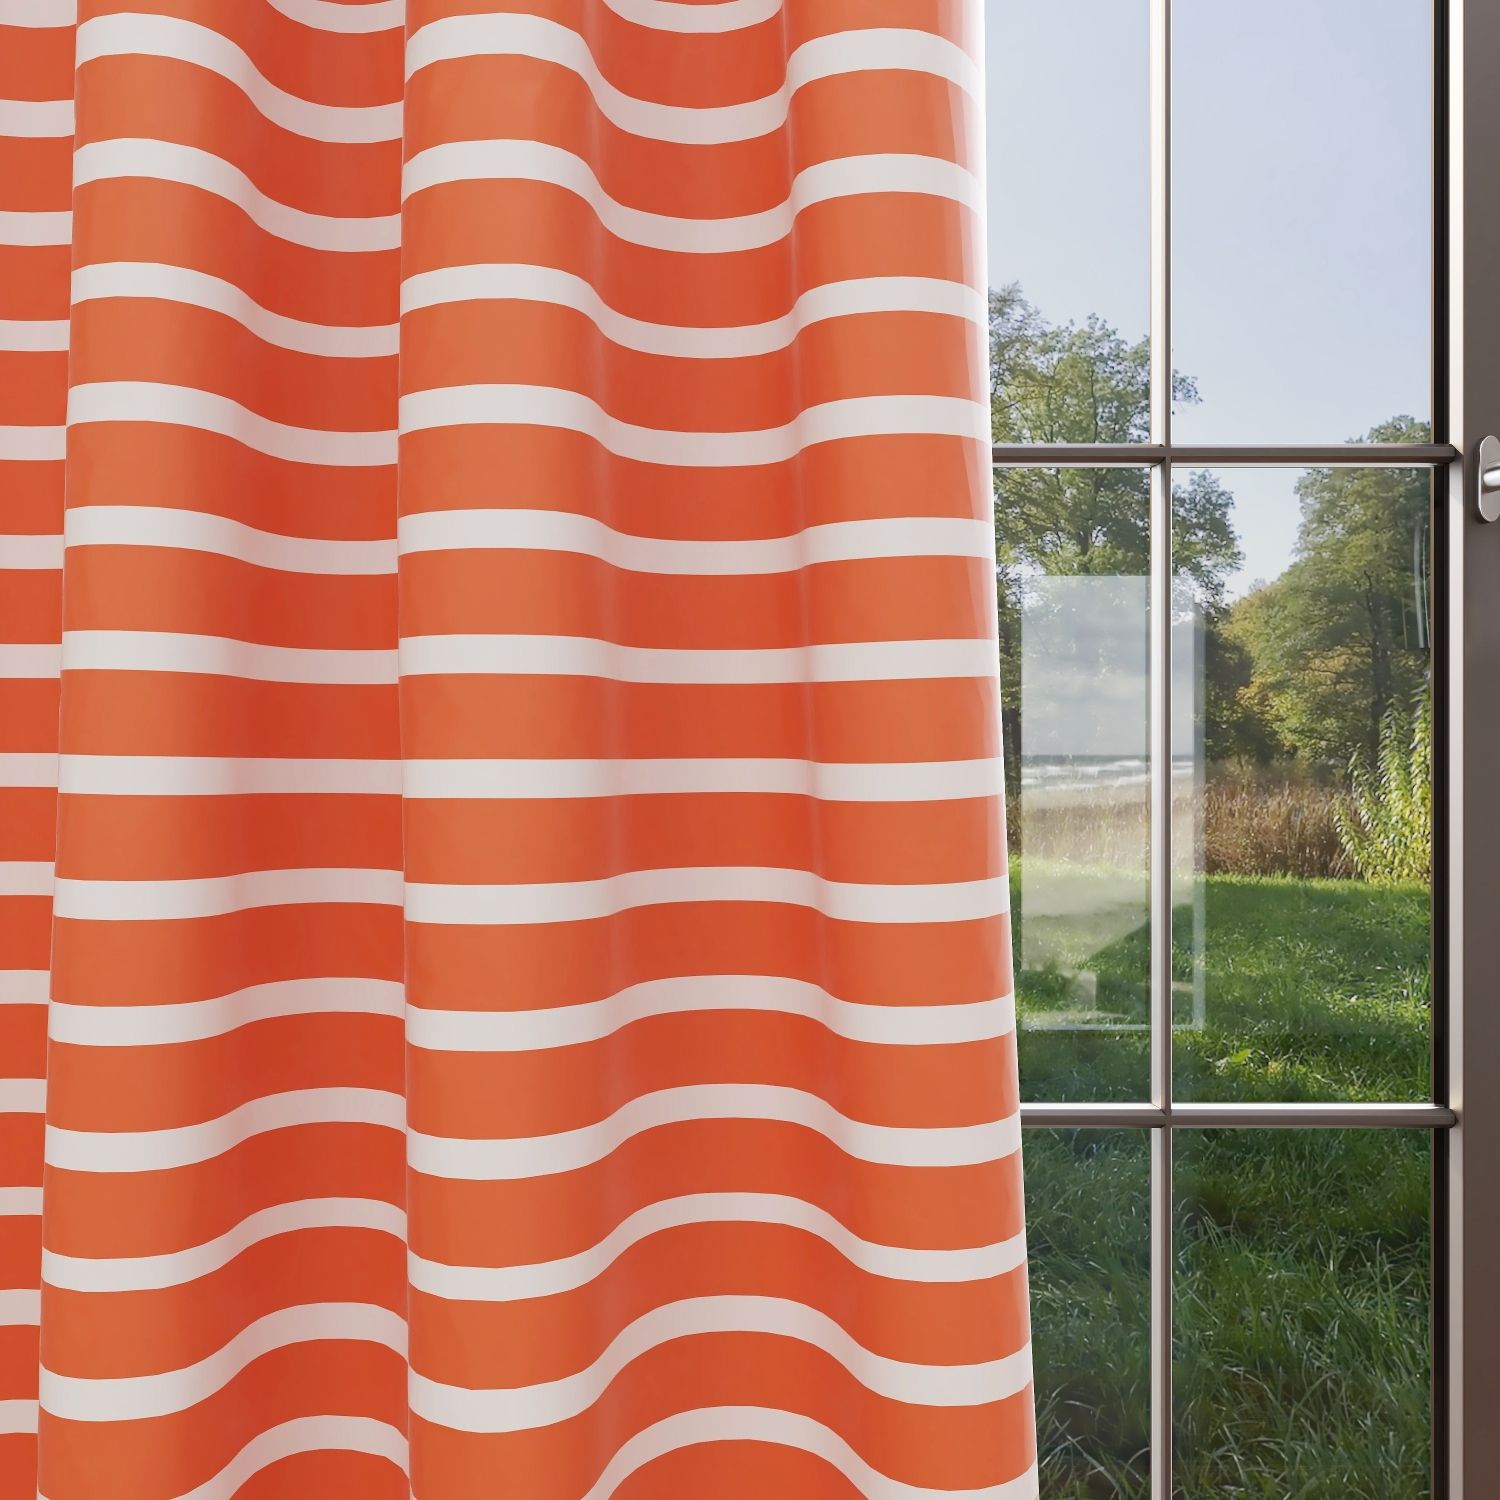 Kids & Nursery Blackout Curtains - Citrus Extracts